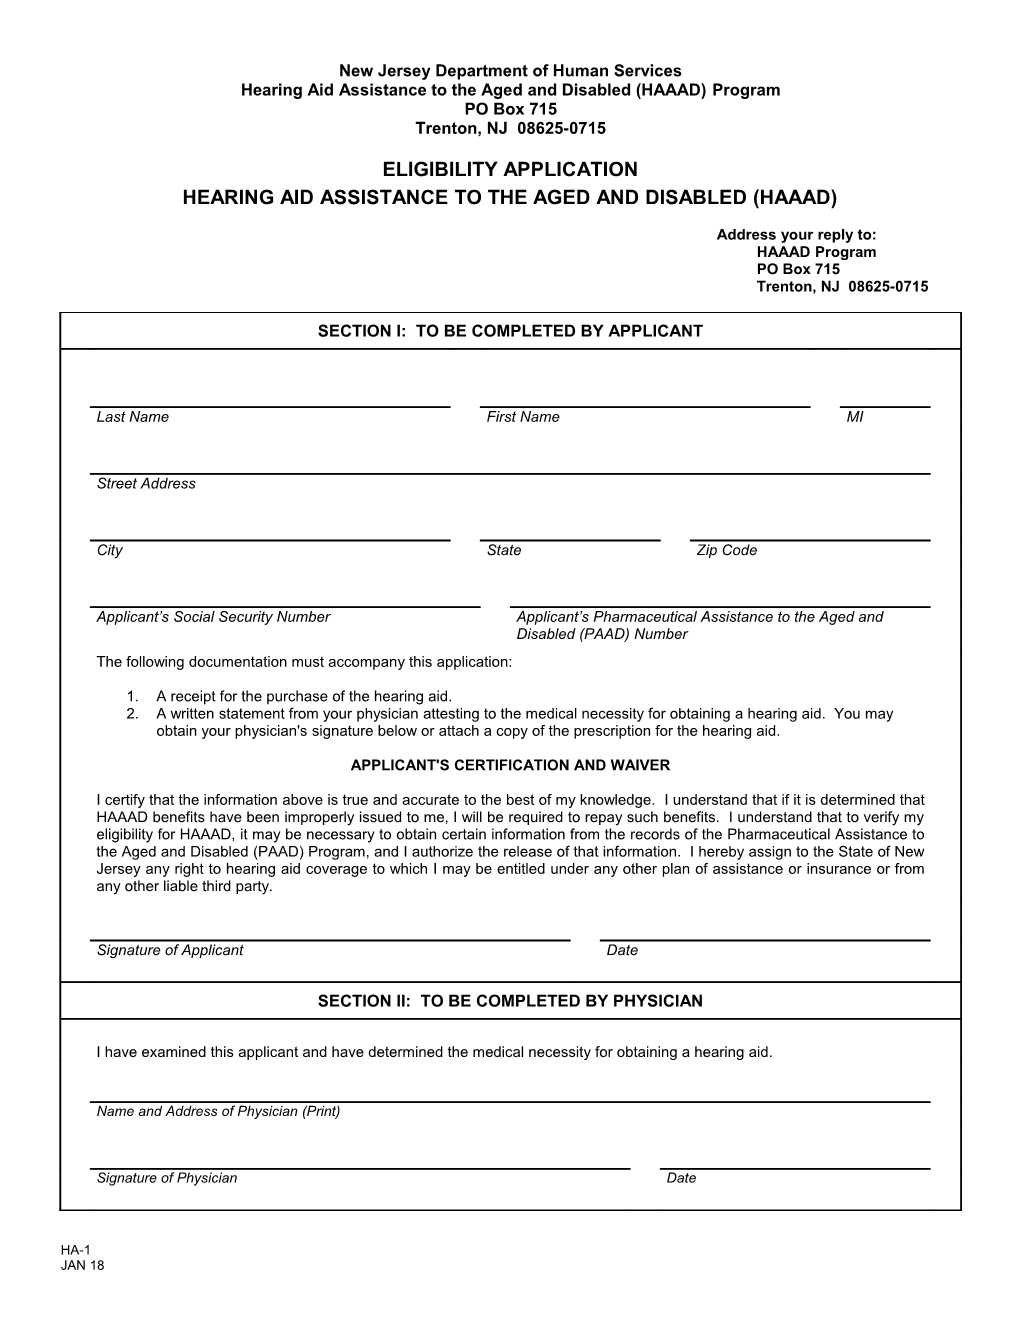 HA-1, Eligibility Application, Hearing Aid Assistance to the Aged and Disabled (HAAAD)